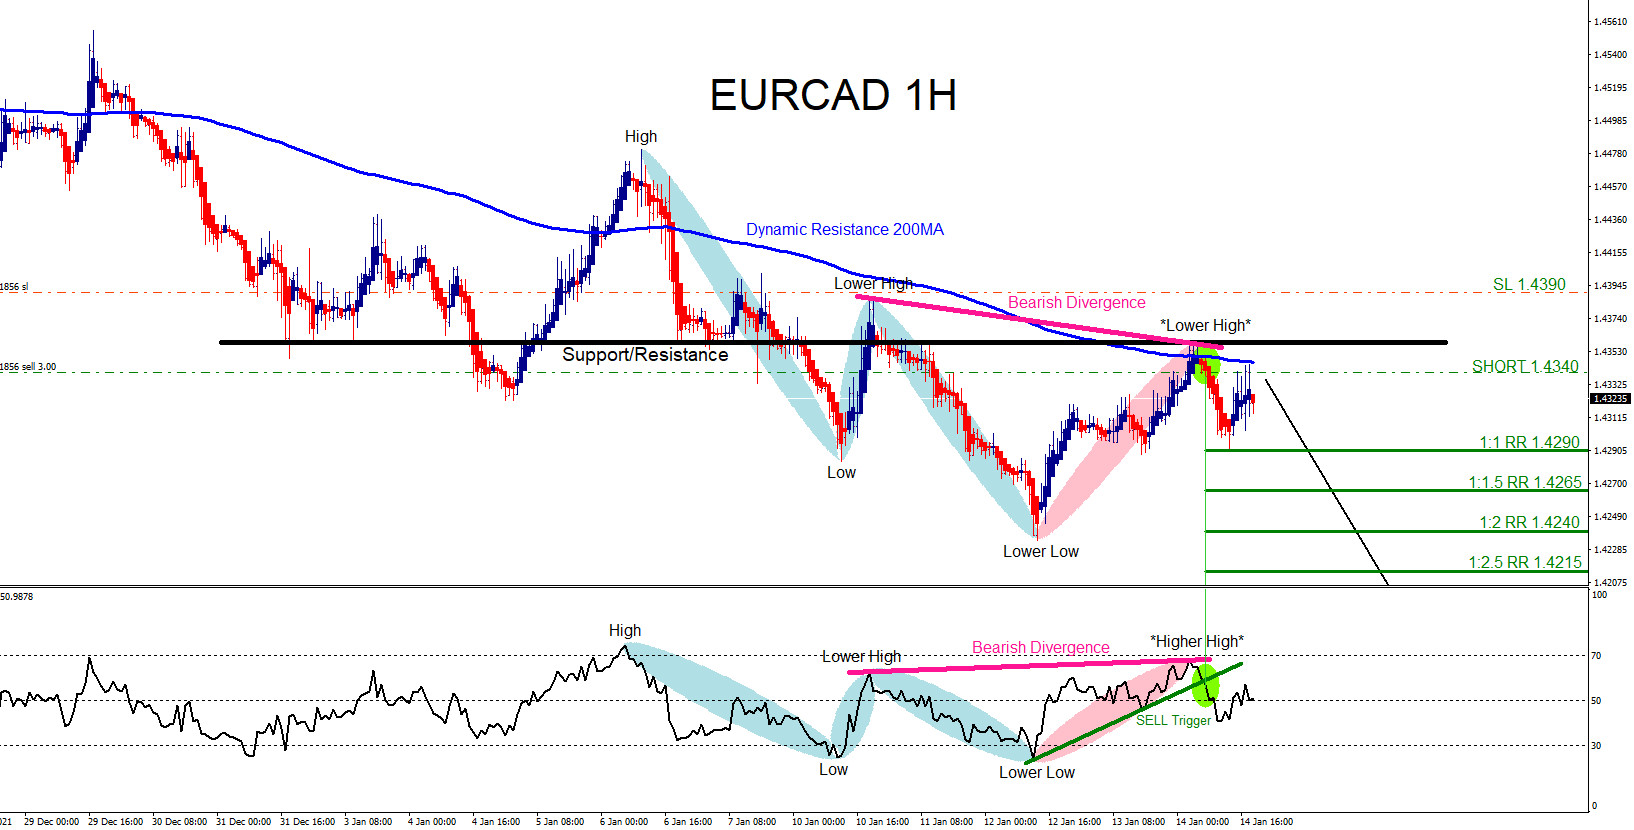 EURCAD : Trading the Move Lower